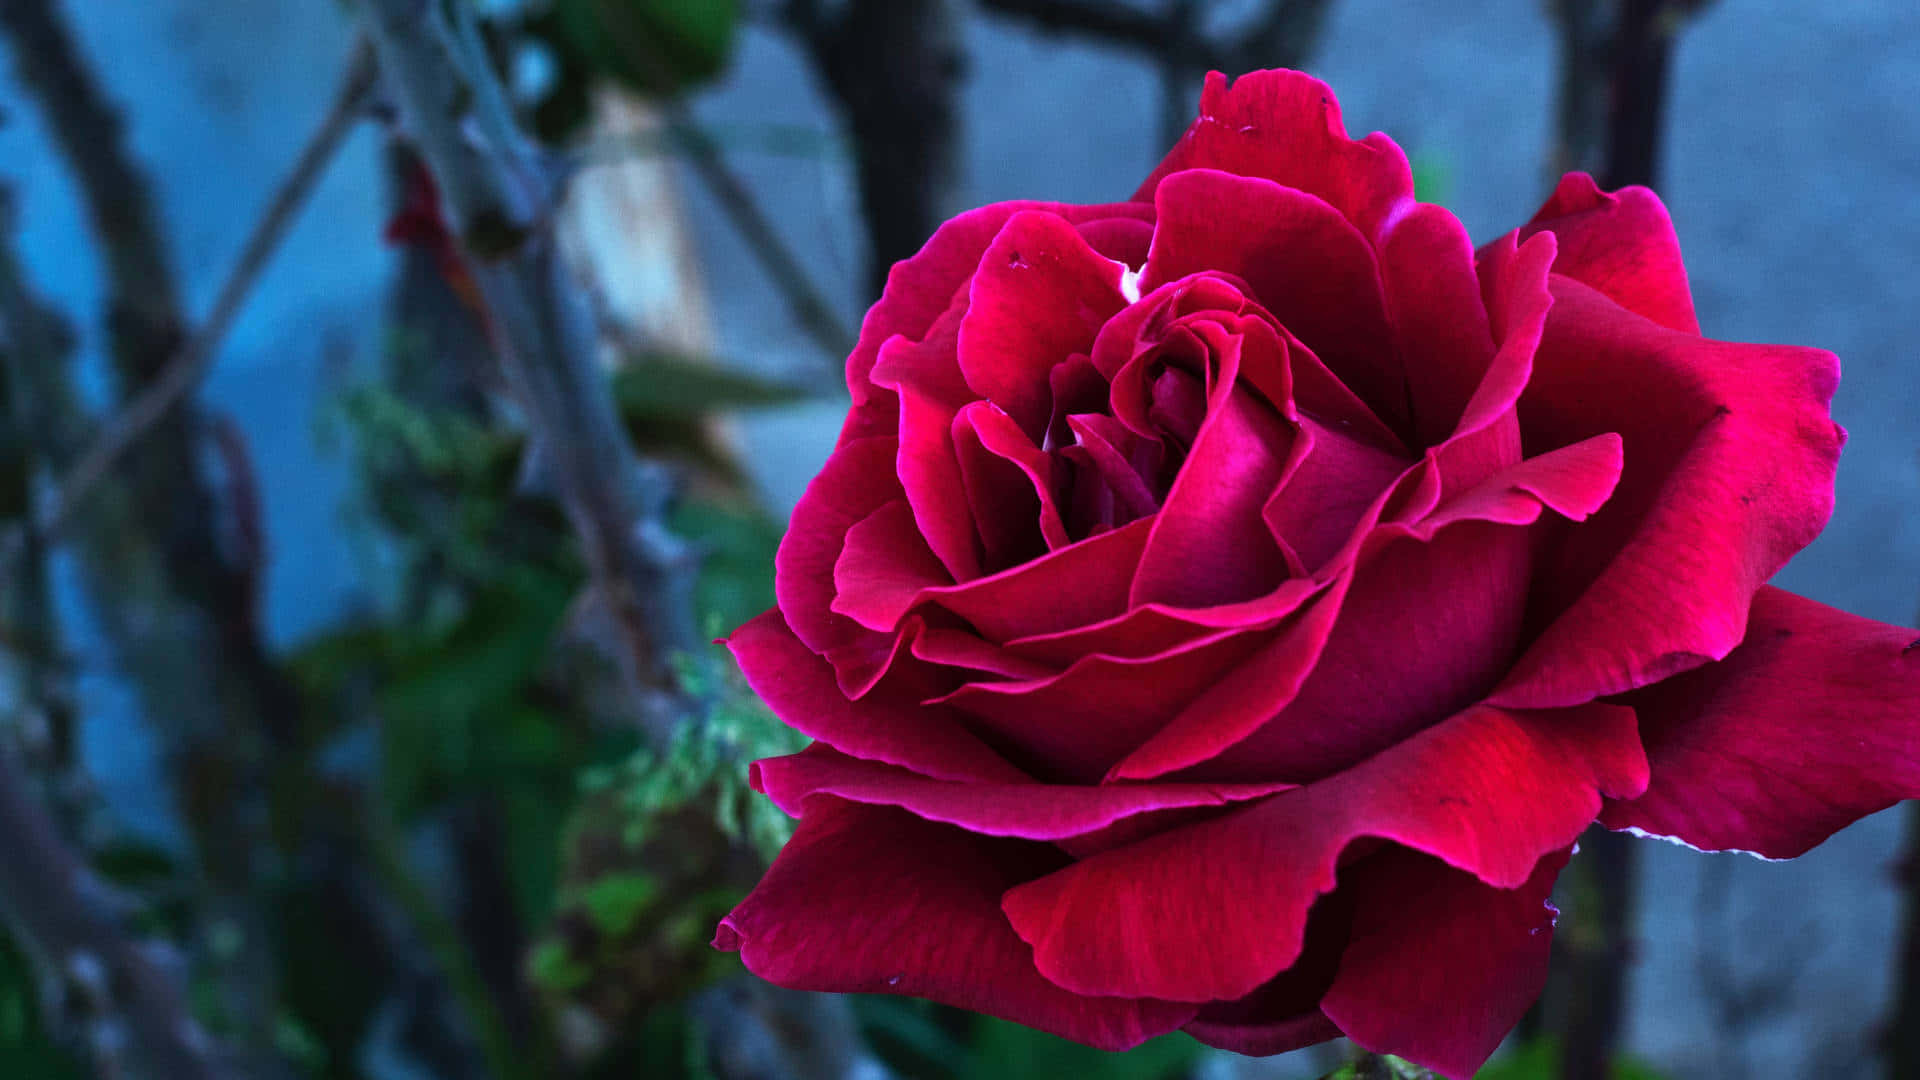 A beautiful, vibrant red rose Wallpaper